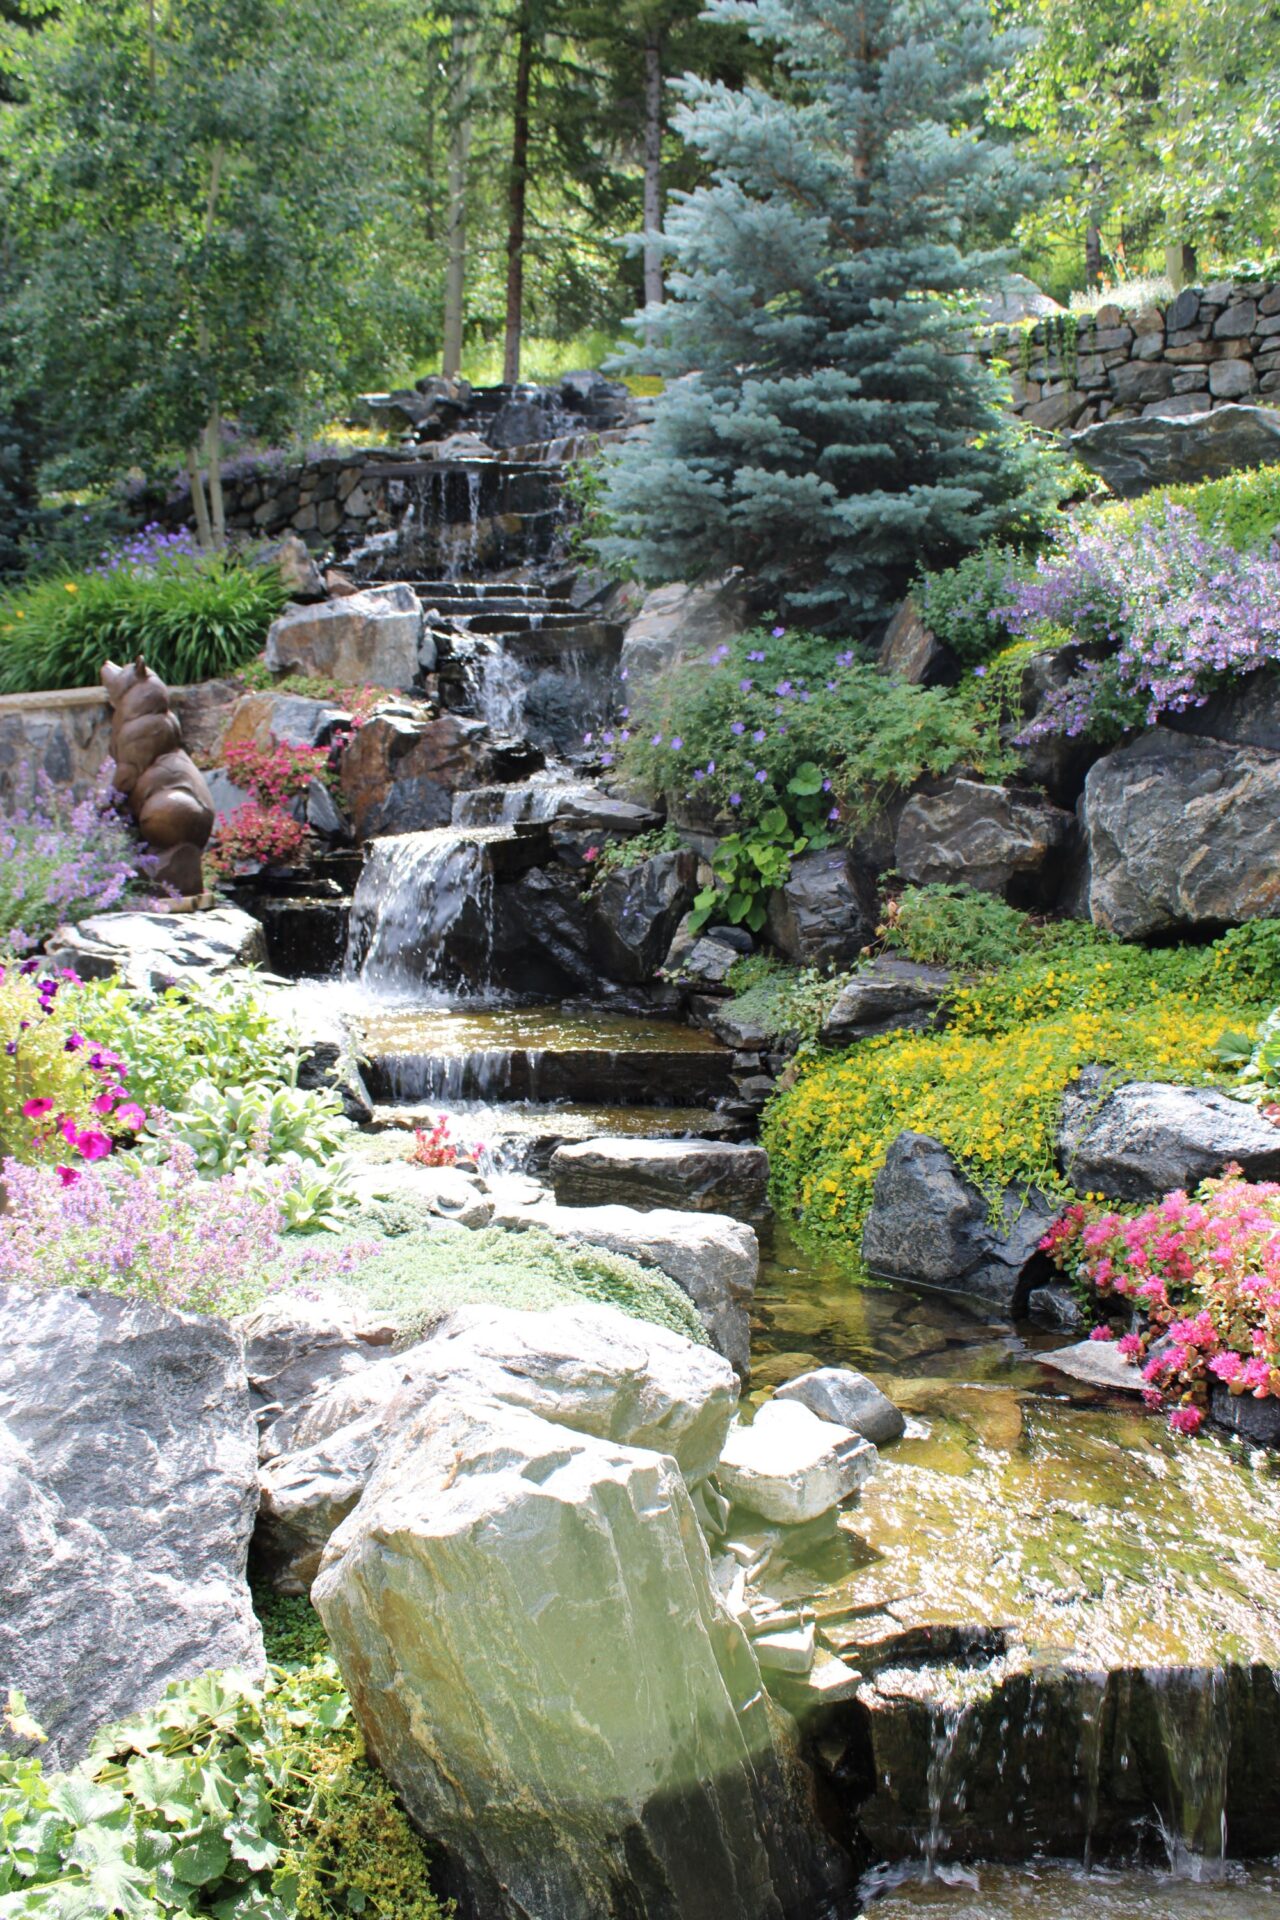 A landscaped garden with a cascading waterfall surrounded by colorful flowers, lush plants, and large rocks, under a sunny sky with trees.